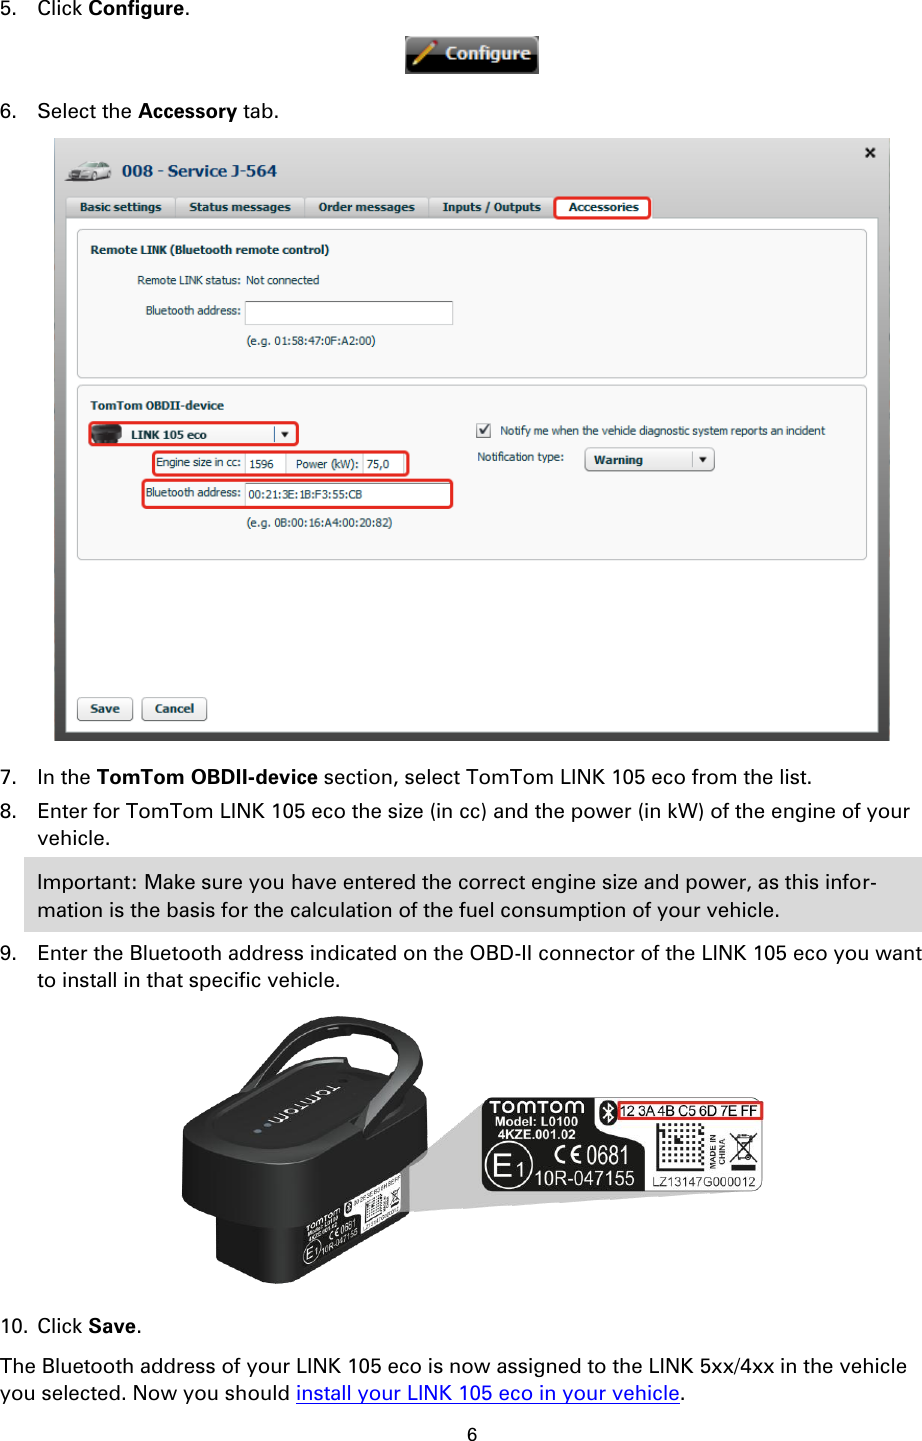 6    5. Click Configure.  6. Select the Accessory tab.  7. In the TomTom OBDII-device section, select TomTom LINK 105 eco from the list. 8. Enter for TomTom LINK 105 eco the size (in cc) and the power (in kW) of the engine of your vehicle. Important: Make sure you have entered the correct engine size and power, as this infor-mation is the basis for the calculation of the fuel consumption of your vehicle. 9. Enter the Bluetooth address indicated on the OBD-II connector of the LINK 105 eco you want to install in that specific vehicle.  10. Click Save. The Bluetooth address of your LINK 105 eco is now assigned to the LINK 5xx/4xx in the vehicle you selected. Now you should install your LINK 105 eco in your vehicle.  